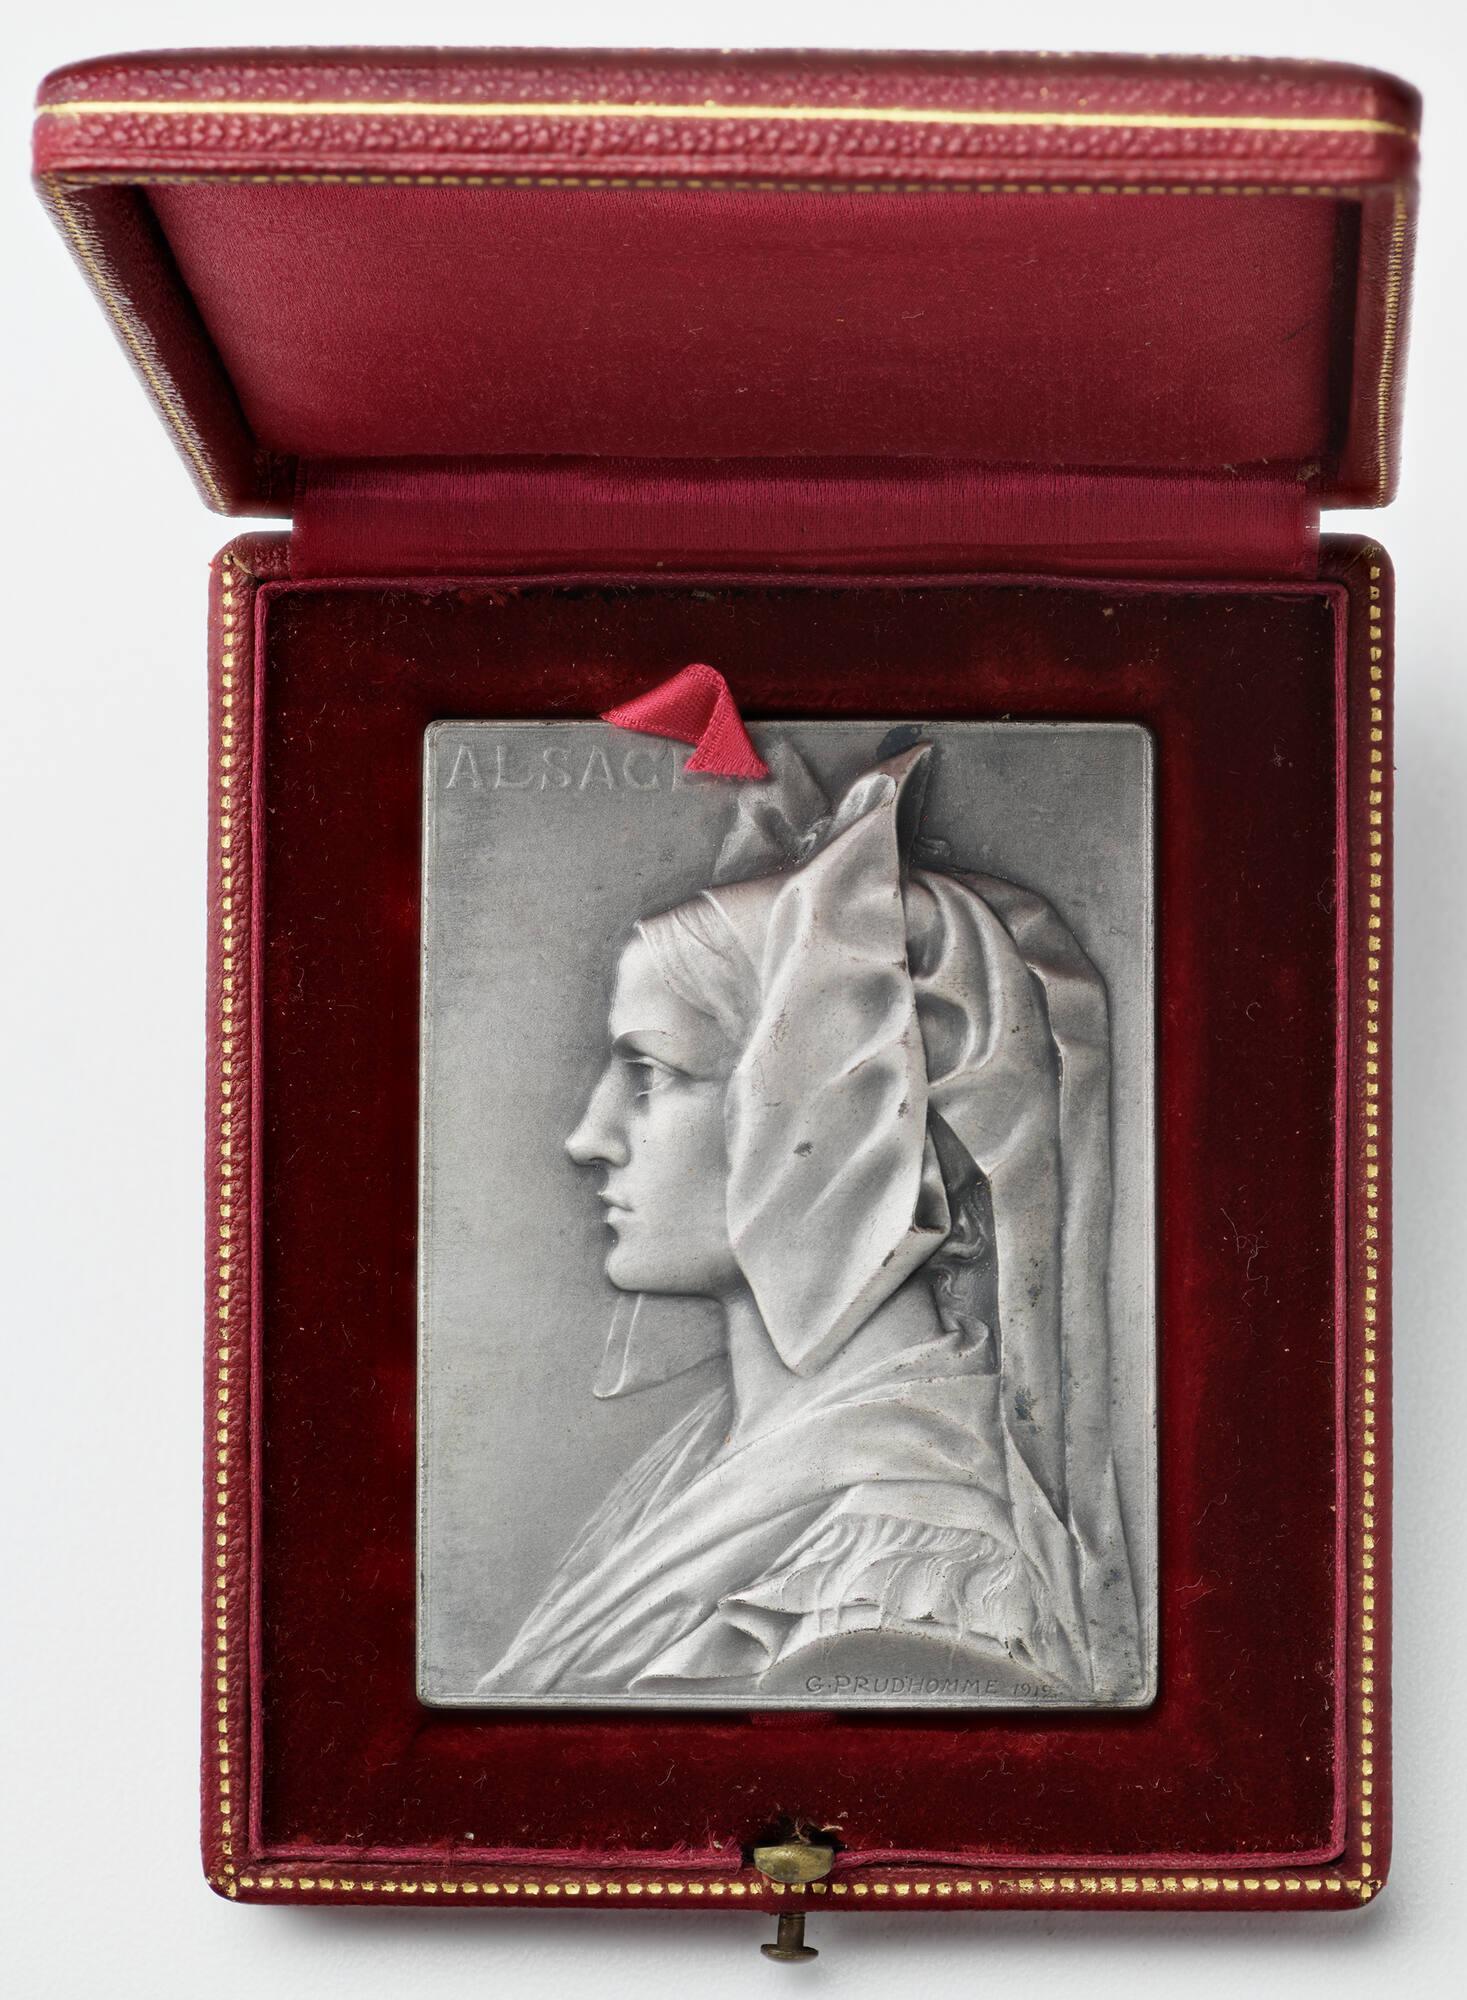 Silver plaquette with the profile of a woman's head and shoulders in high relief, set in a hinged box.